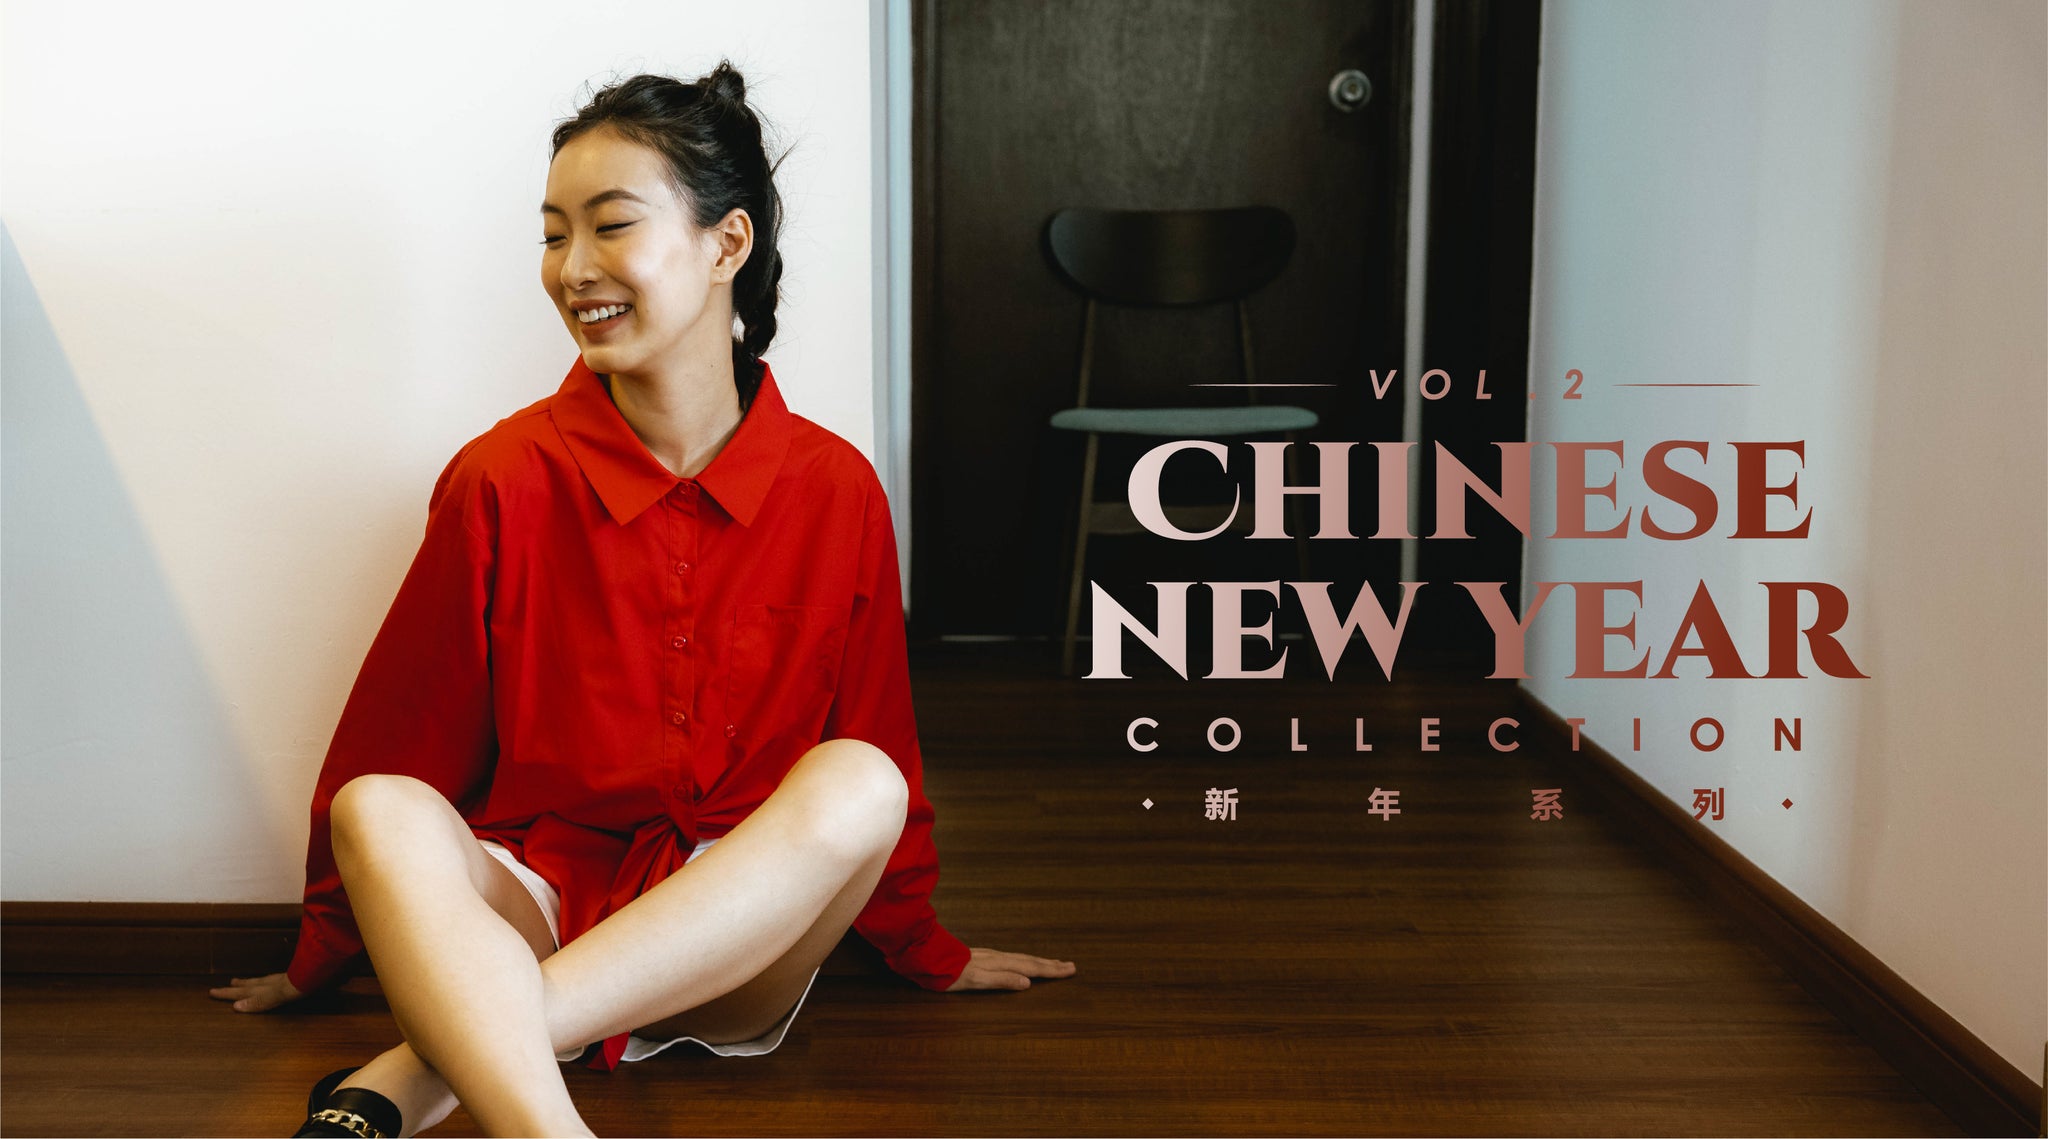 Chinese New Year Collection - Vol.2